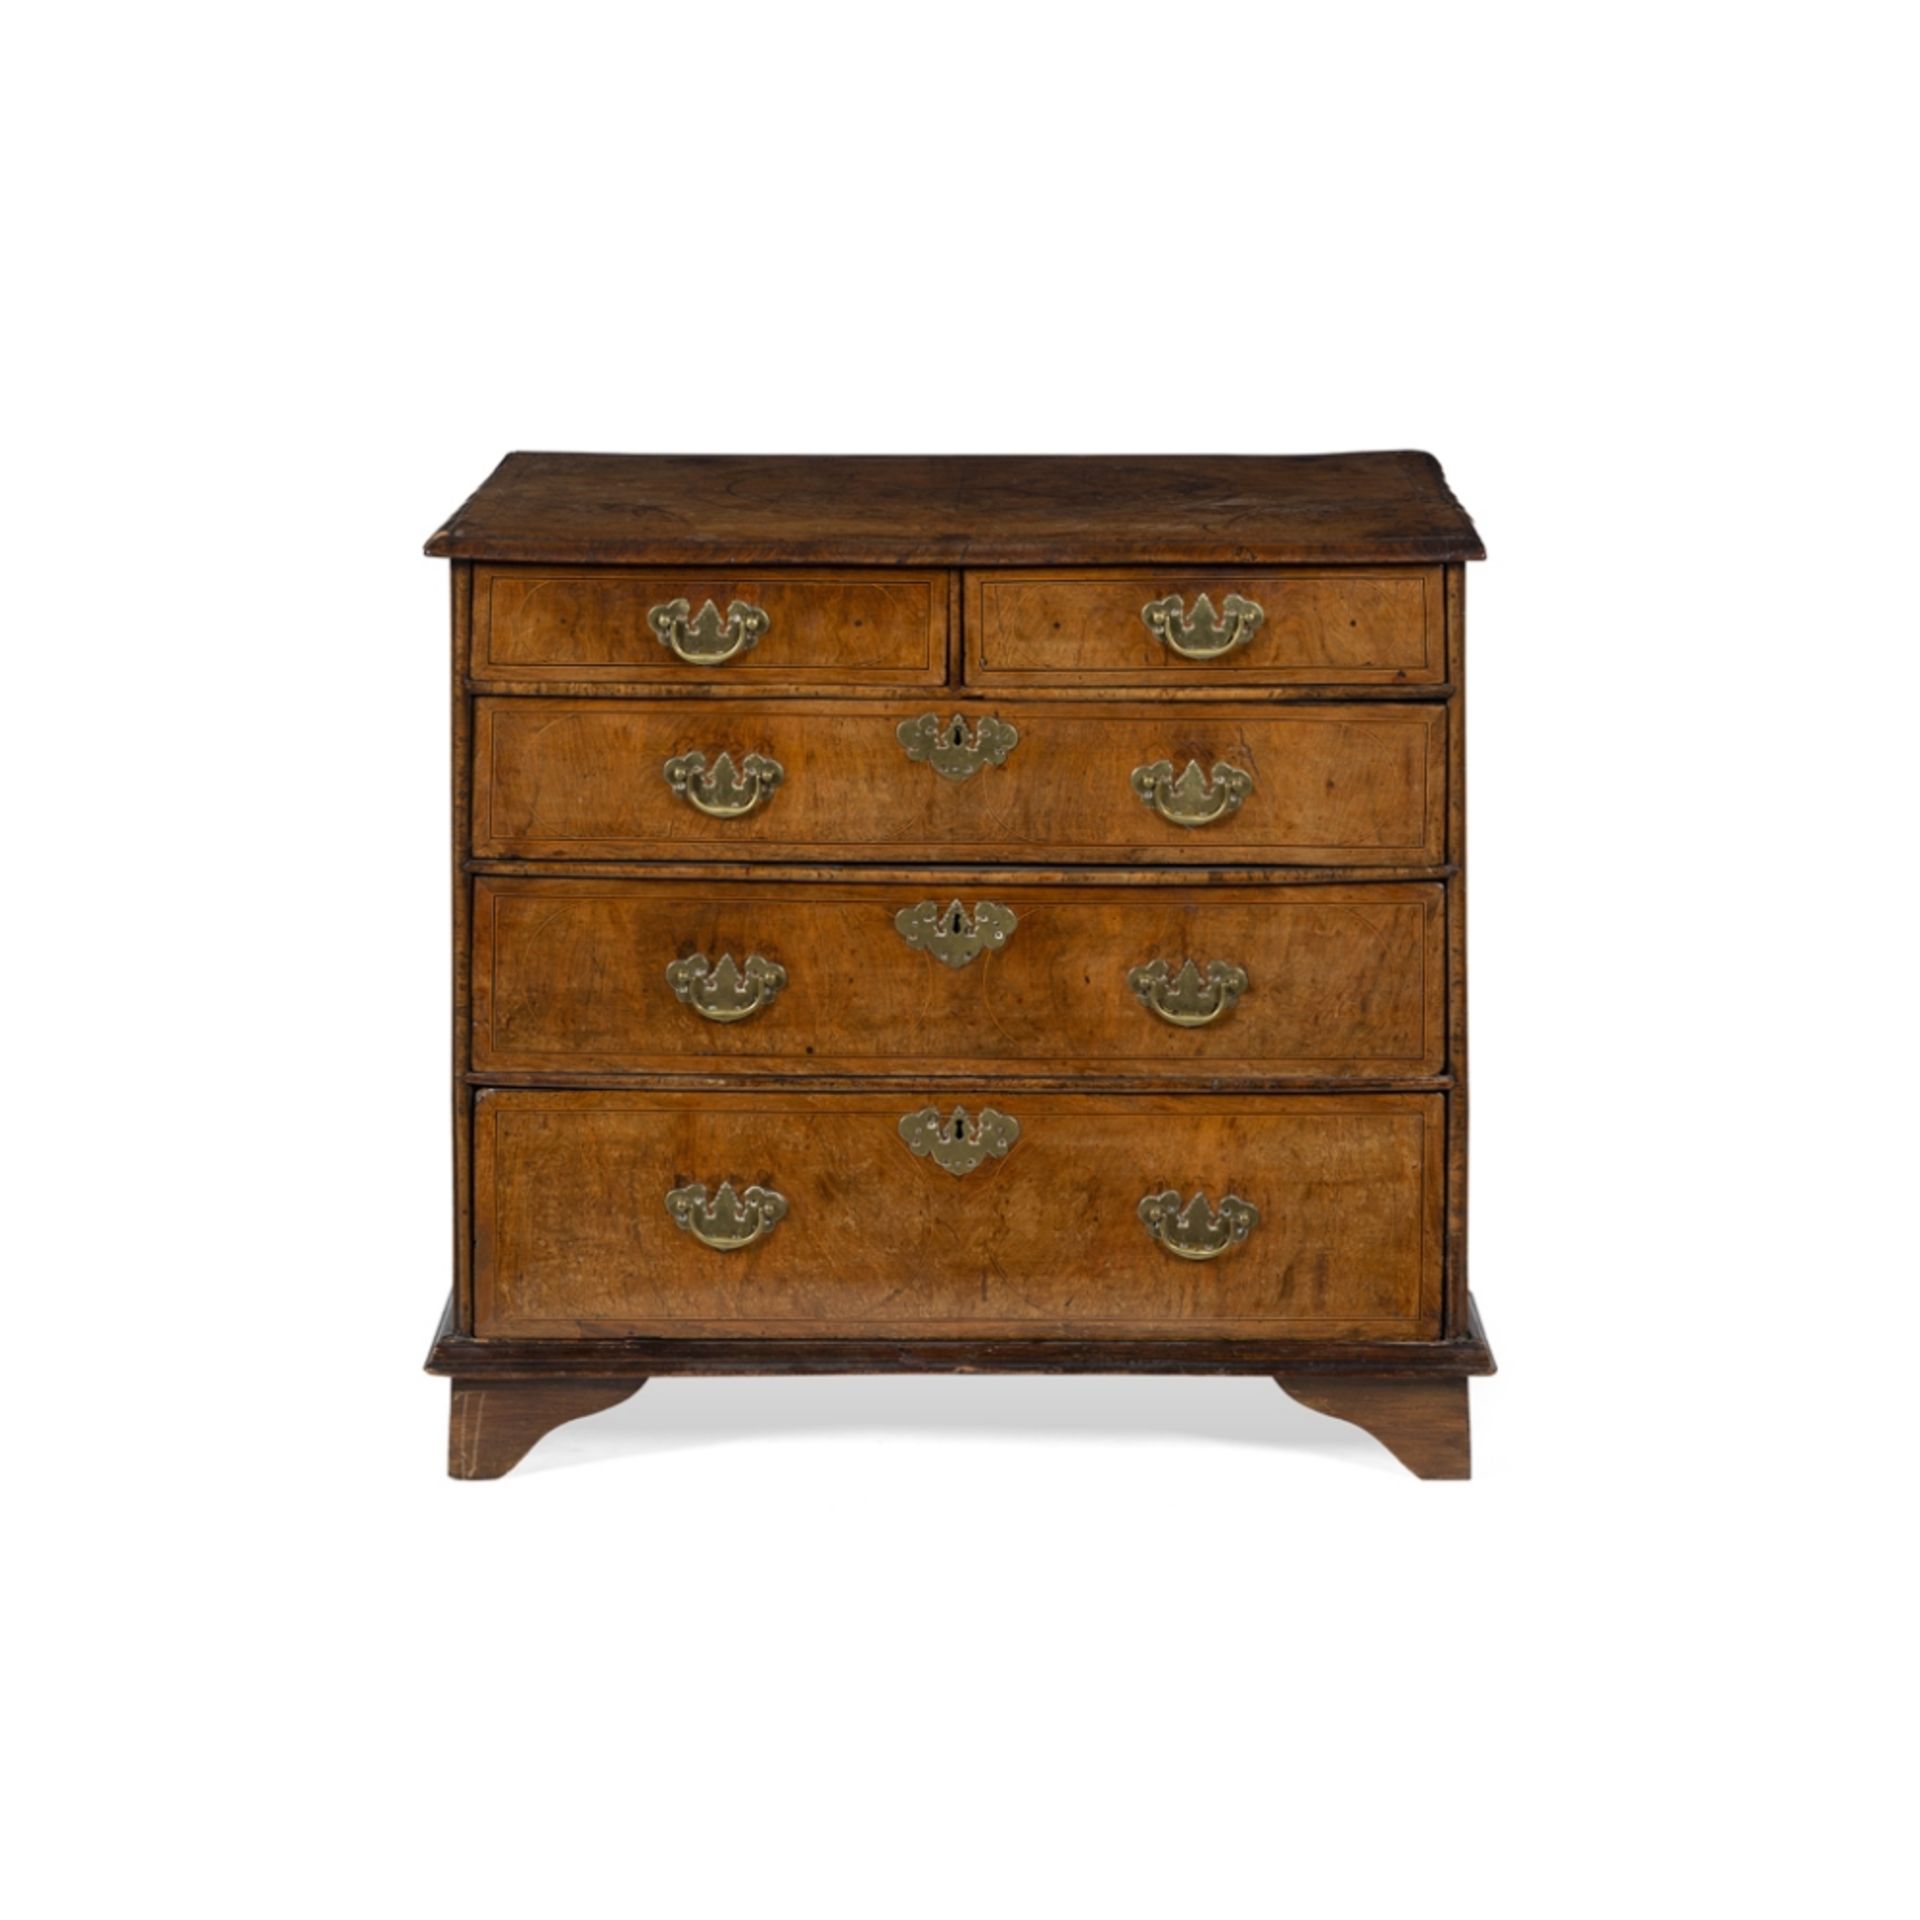 QUEEN ANNE WALNUT CHEST OF DRAWERSEARLY 18TH CENTURY the quarter veneered top with line and